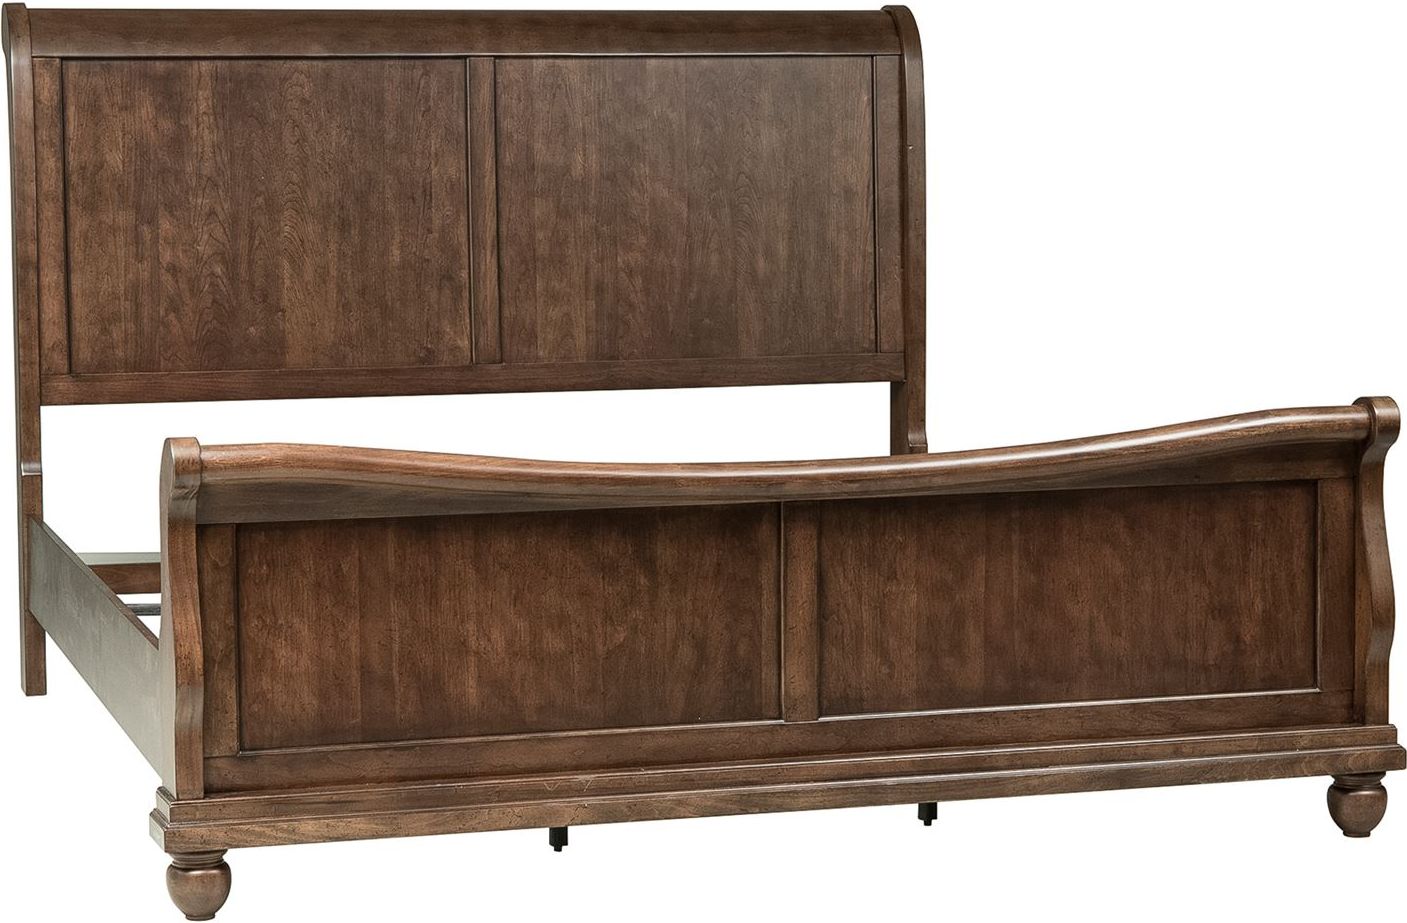 Liberty Furniture Rustic Traditions Rustic Cherry Queen Sleigh Bed